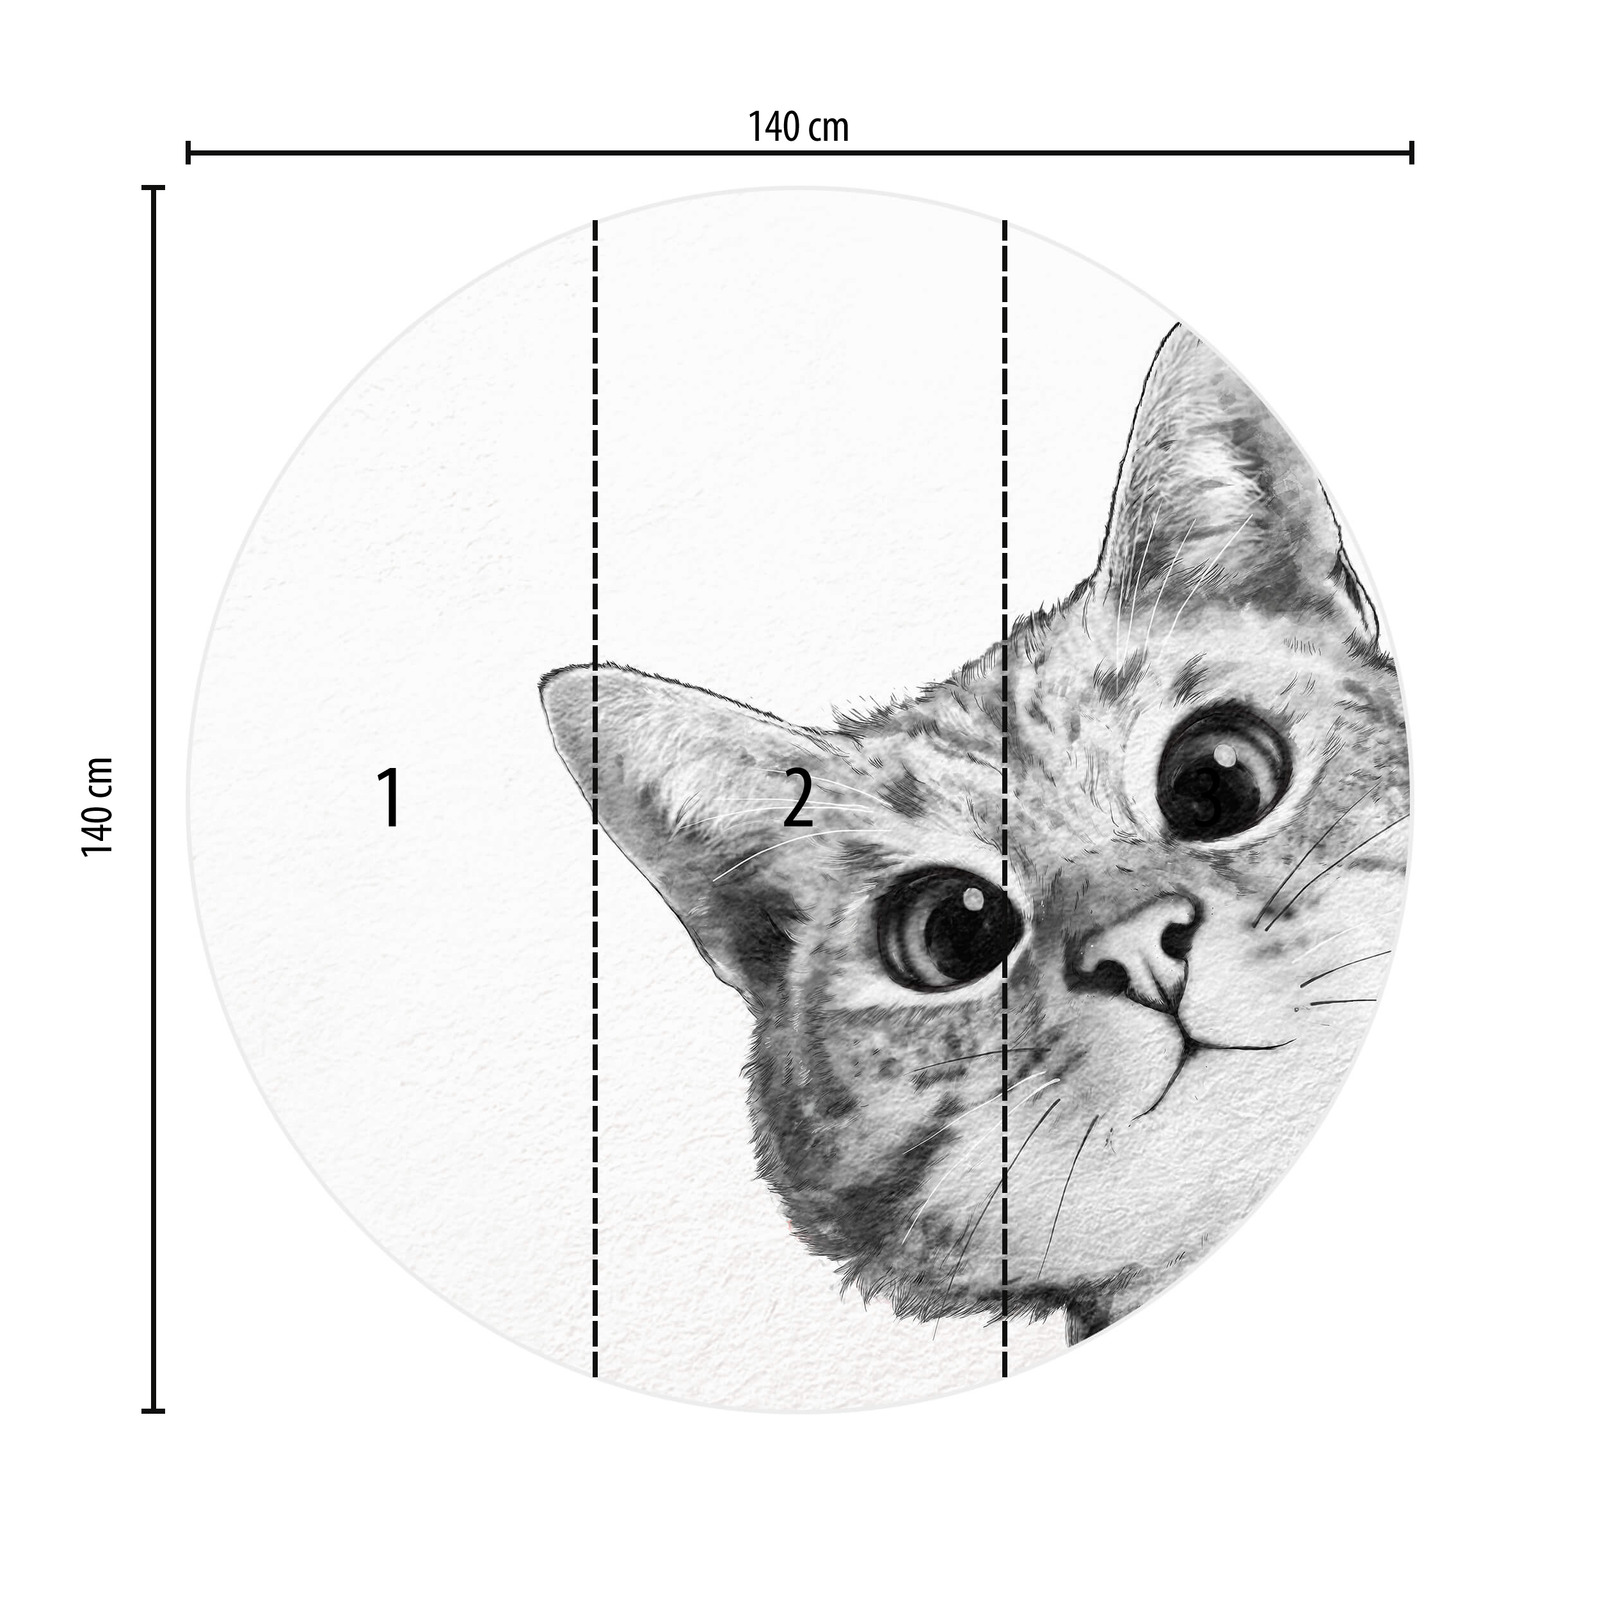             Photo wallpaper round cat face in black & white
        